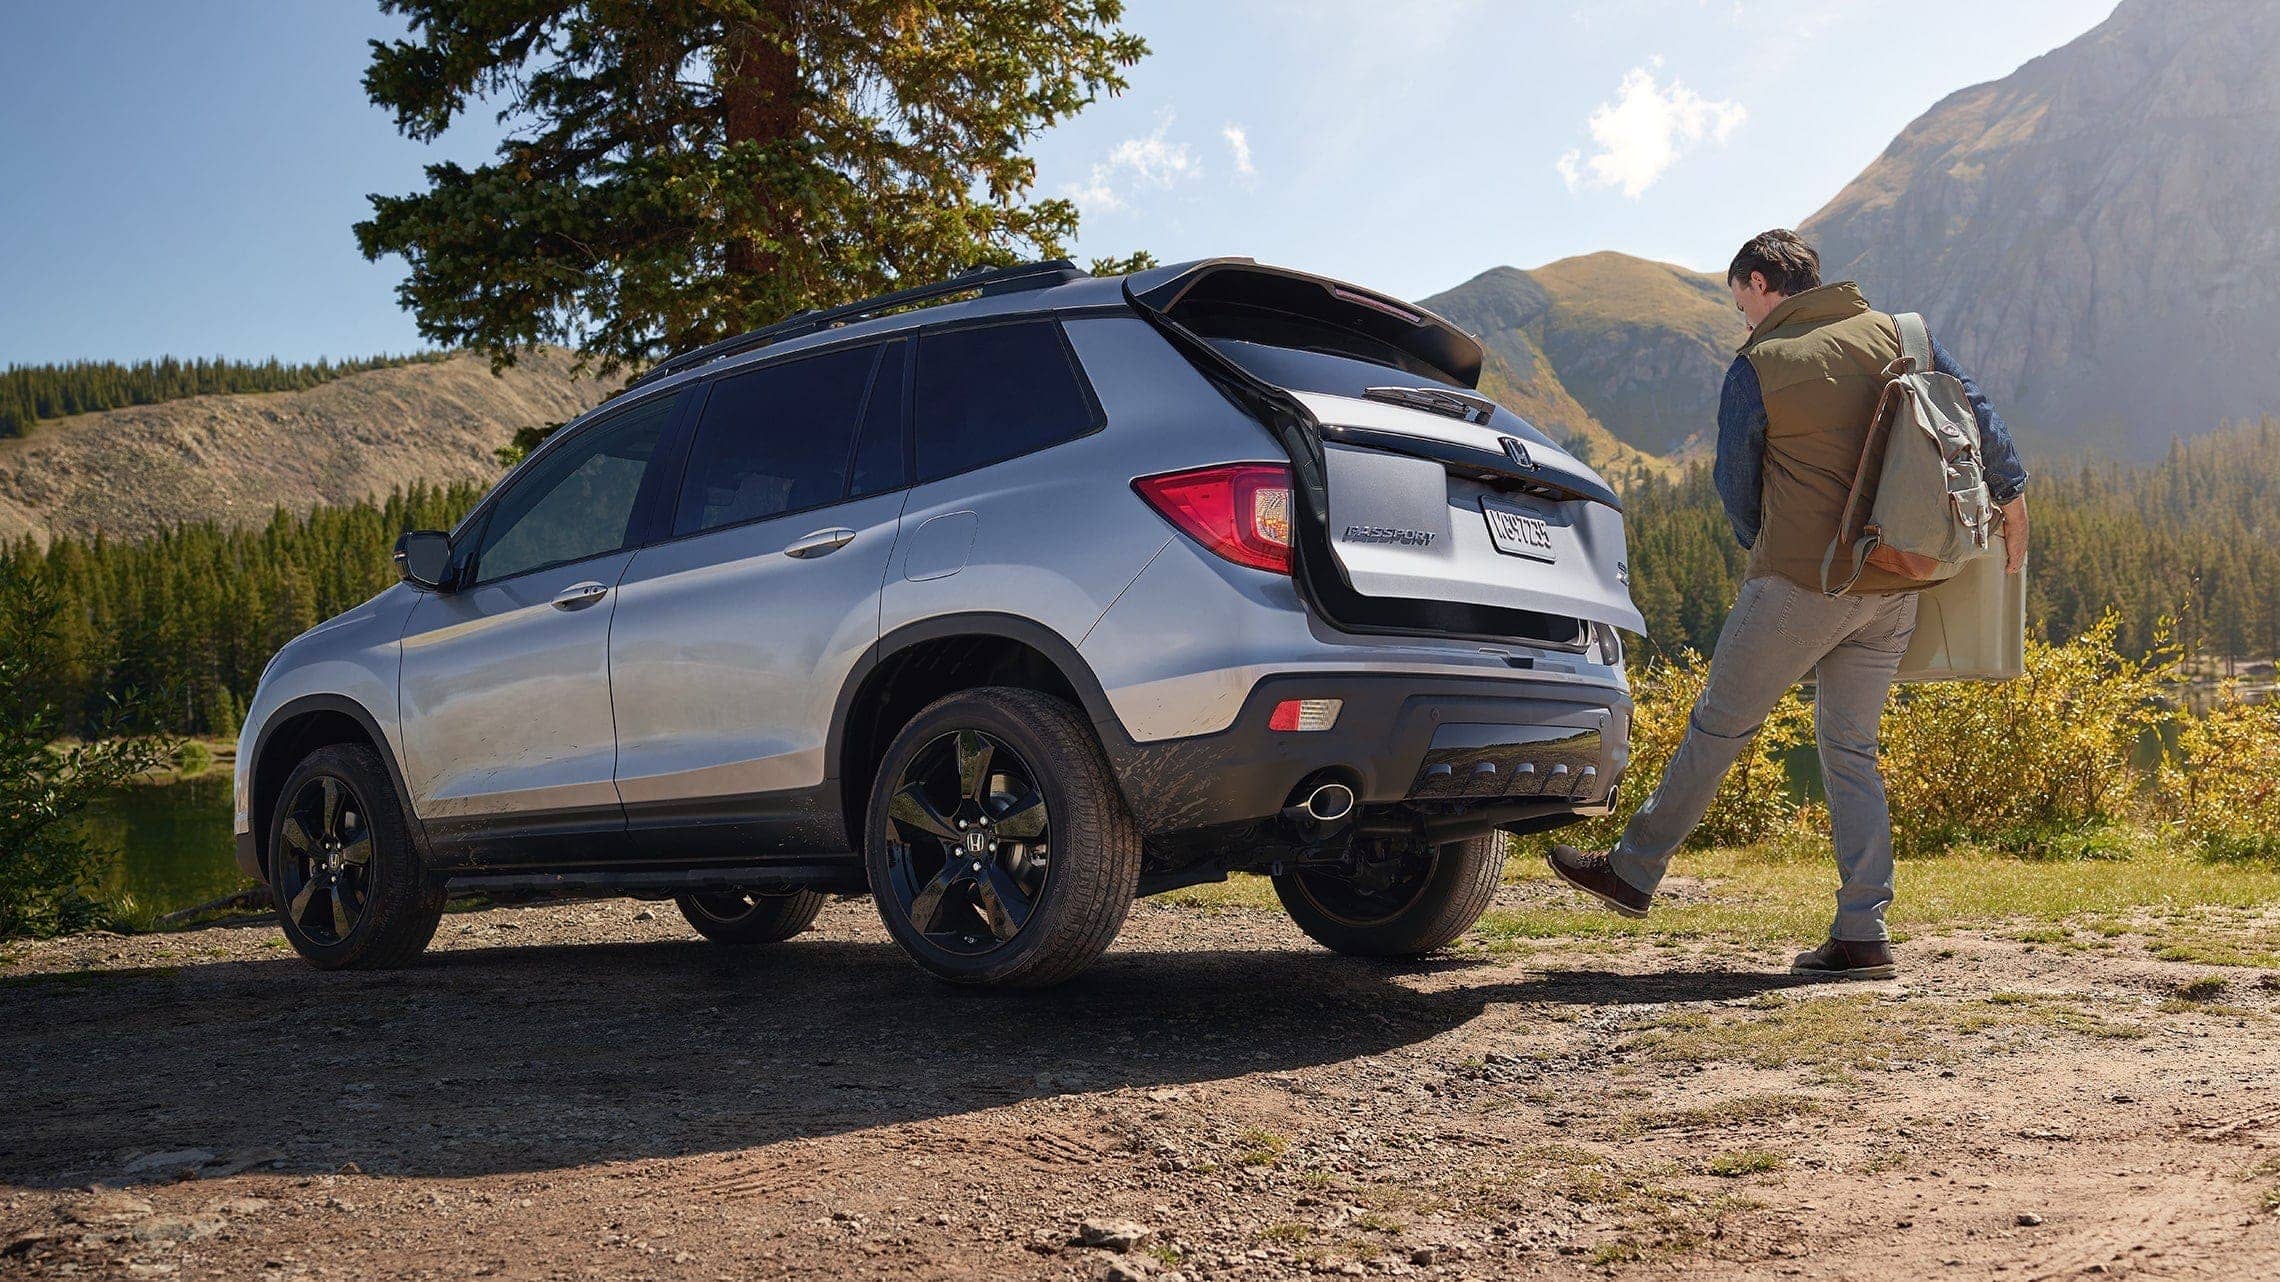 Driver-side rear 3/4 view of 2019 Honda Passport Elite in Lunar Silver Metallic, parked at campsite and demonstrating the hands-free access power tailgate feature.